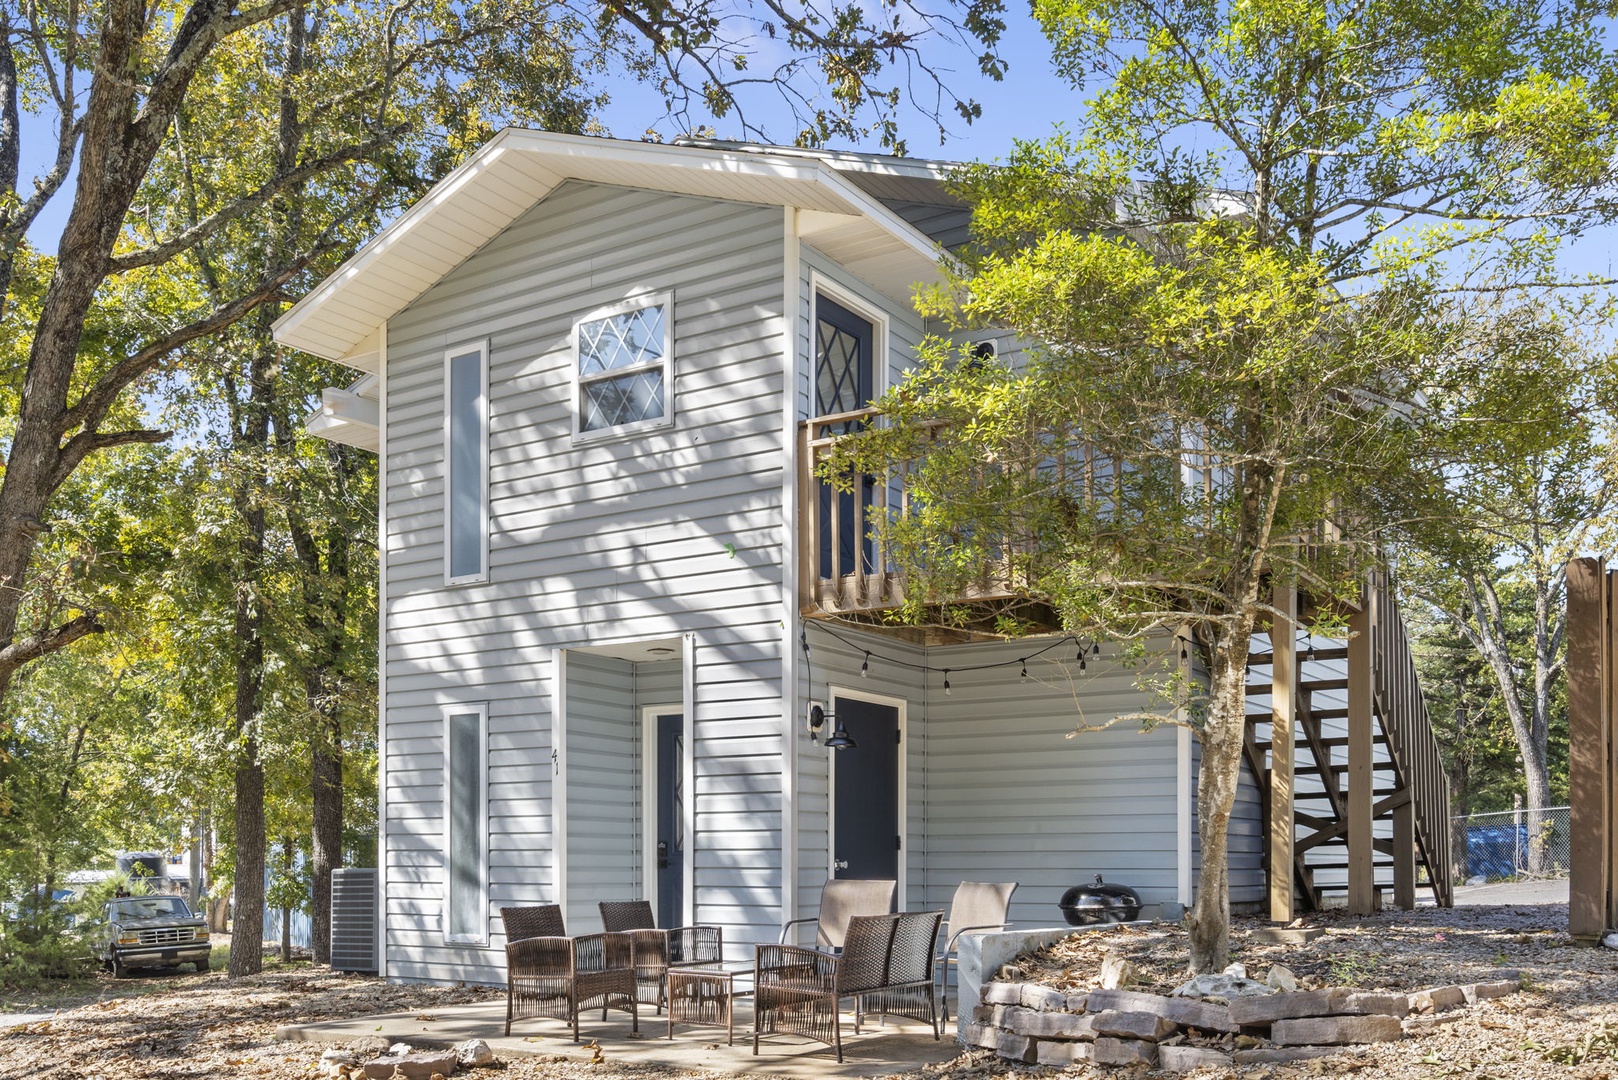 Unit 41: Welcome to the 1st of 3 gorgeously updated, private cottages!